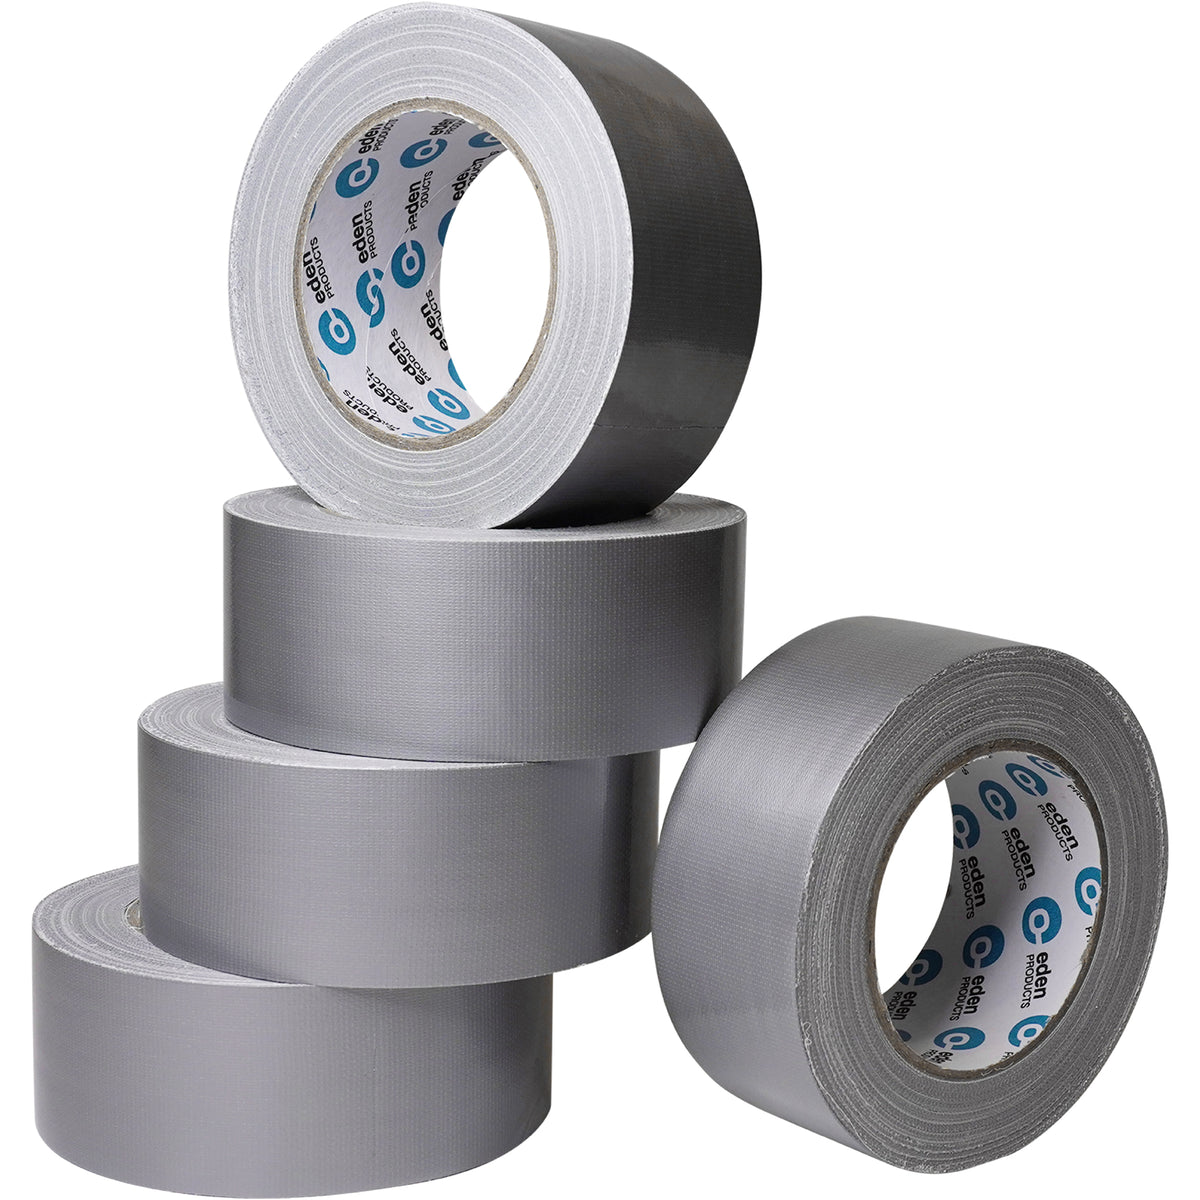 ETI DUCT TAPE 48mm x 50 Mtr Pack Of 1 Roll,Grey 